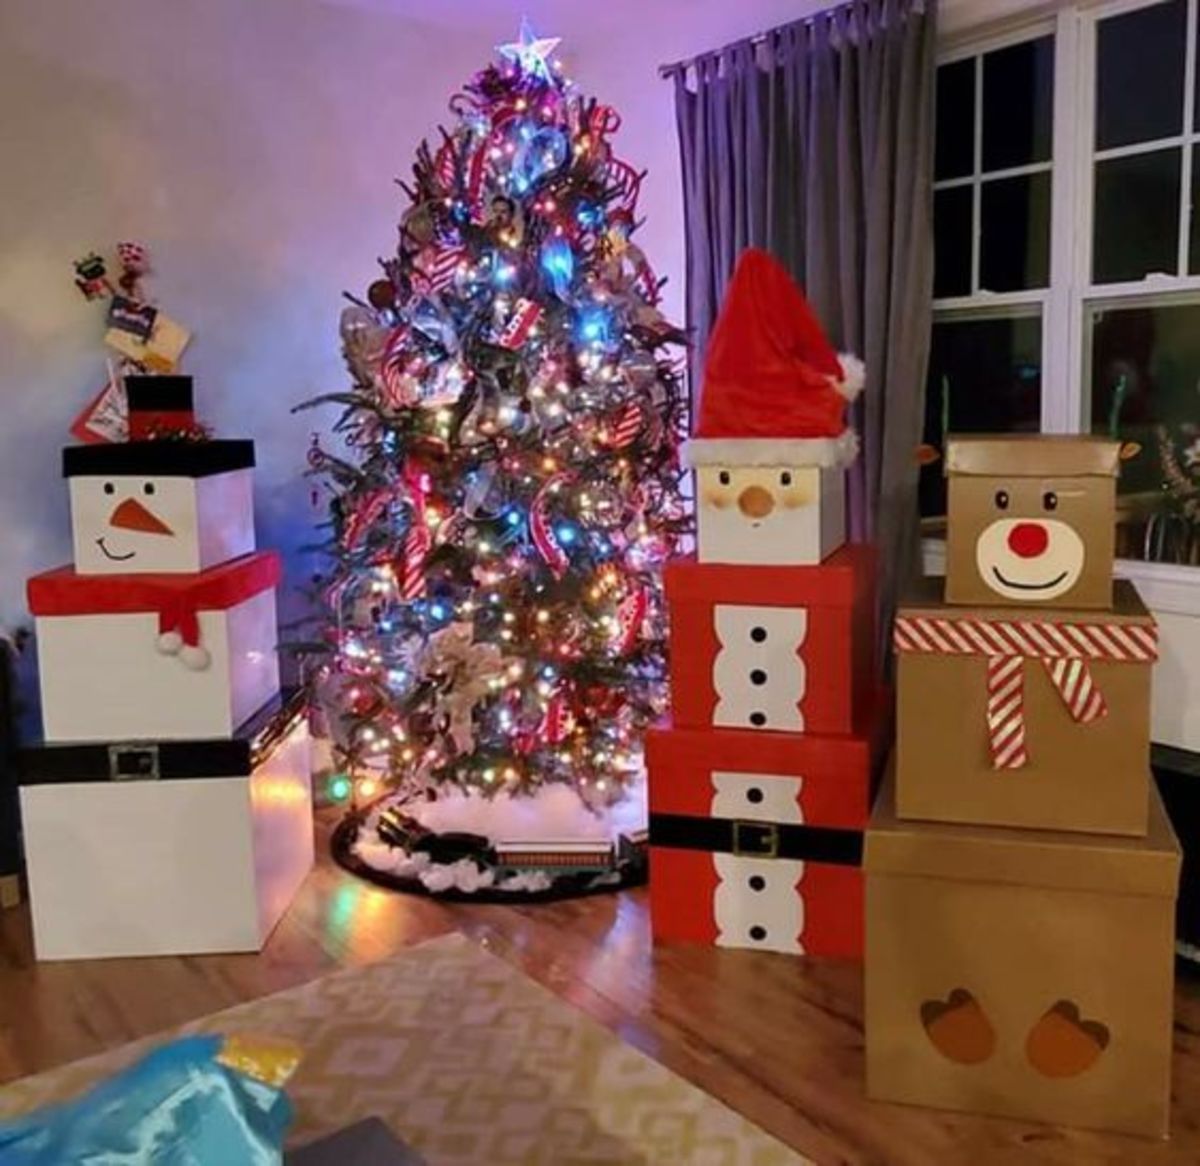 This amazing gift display features a snowman, reindeer and Santa!